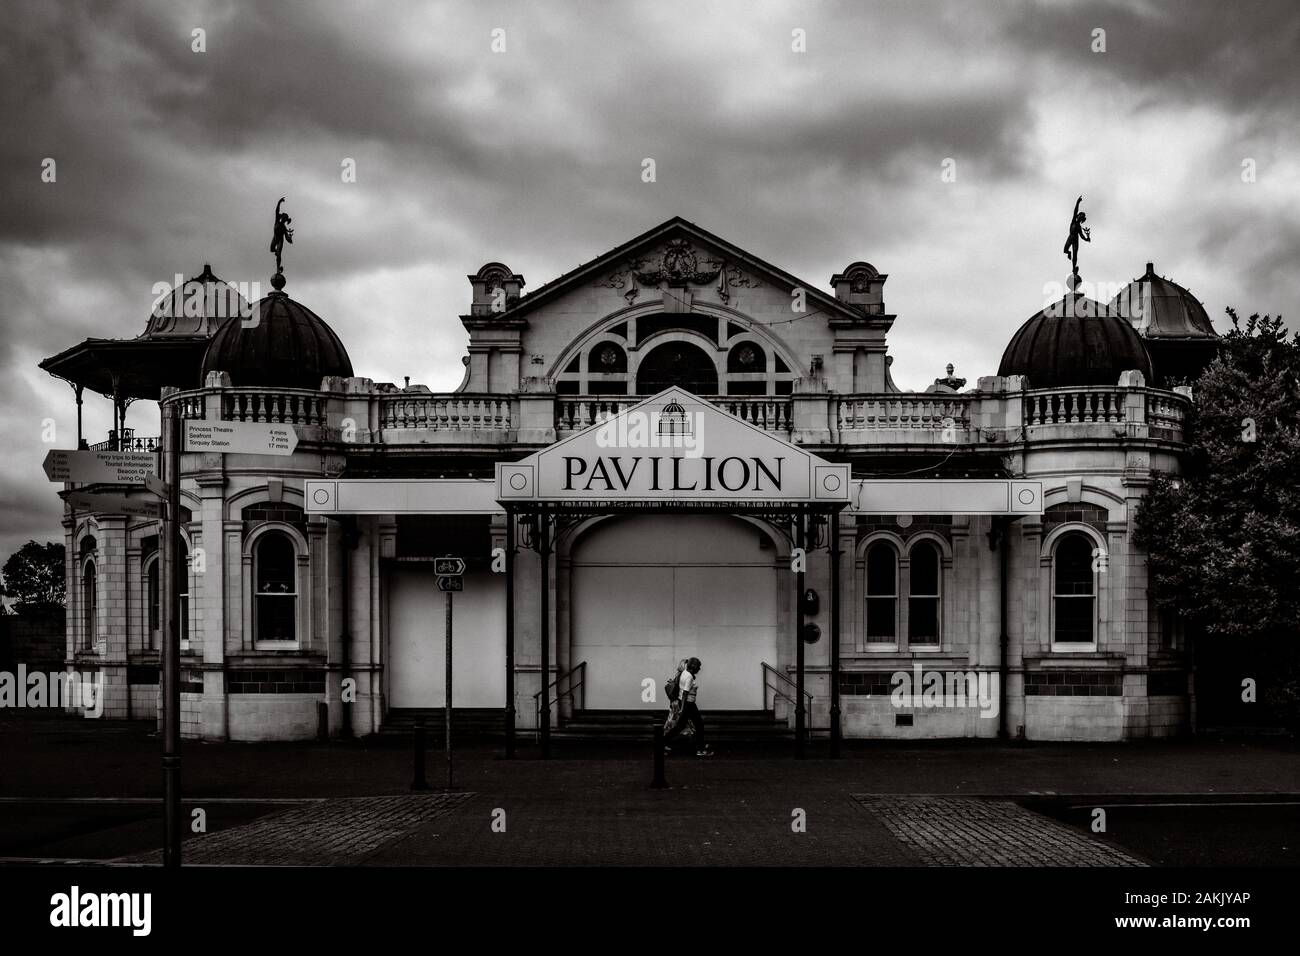 Old Pavilion at Torquay seafront in Devon England 2019 Stock Photo